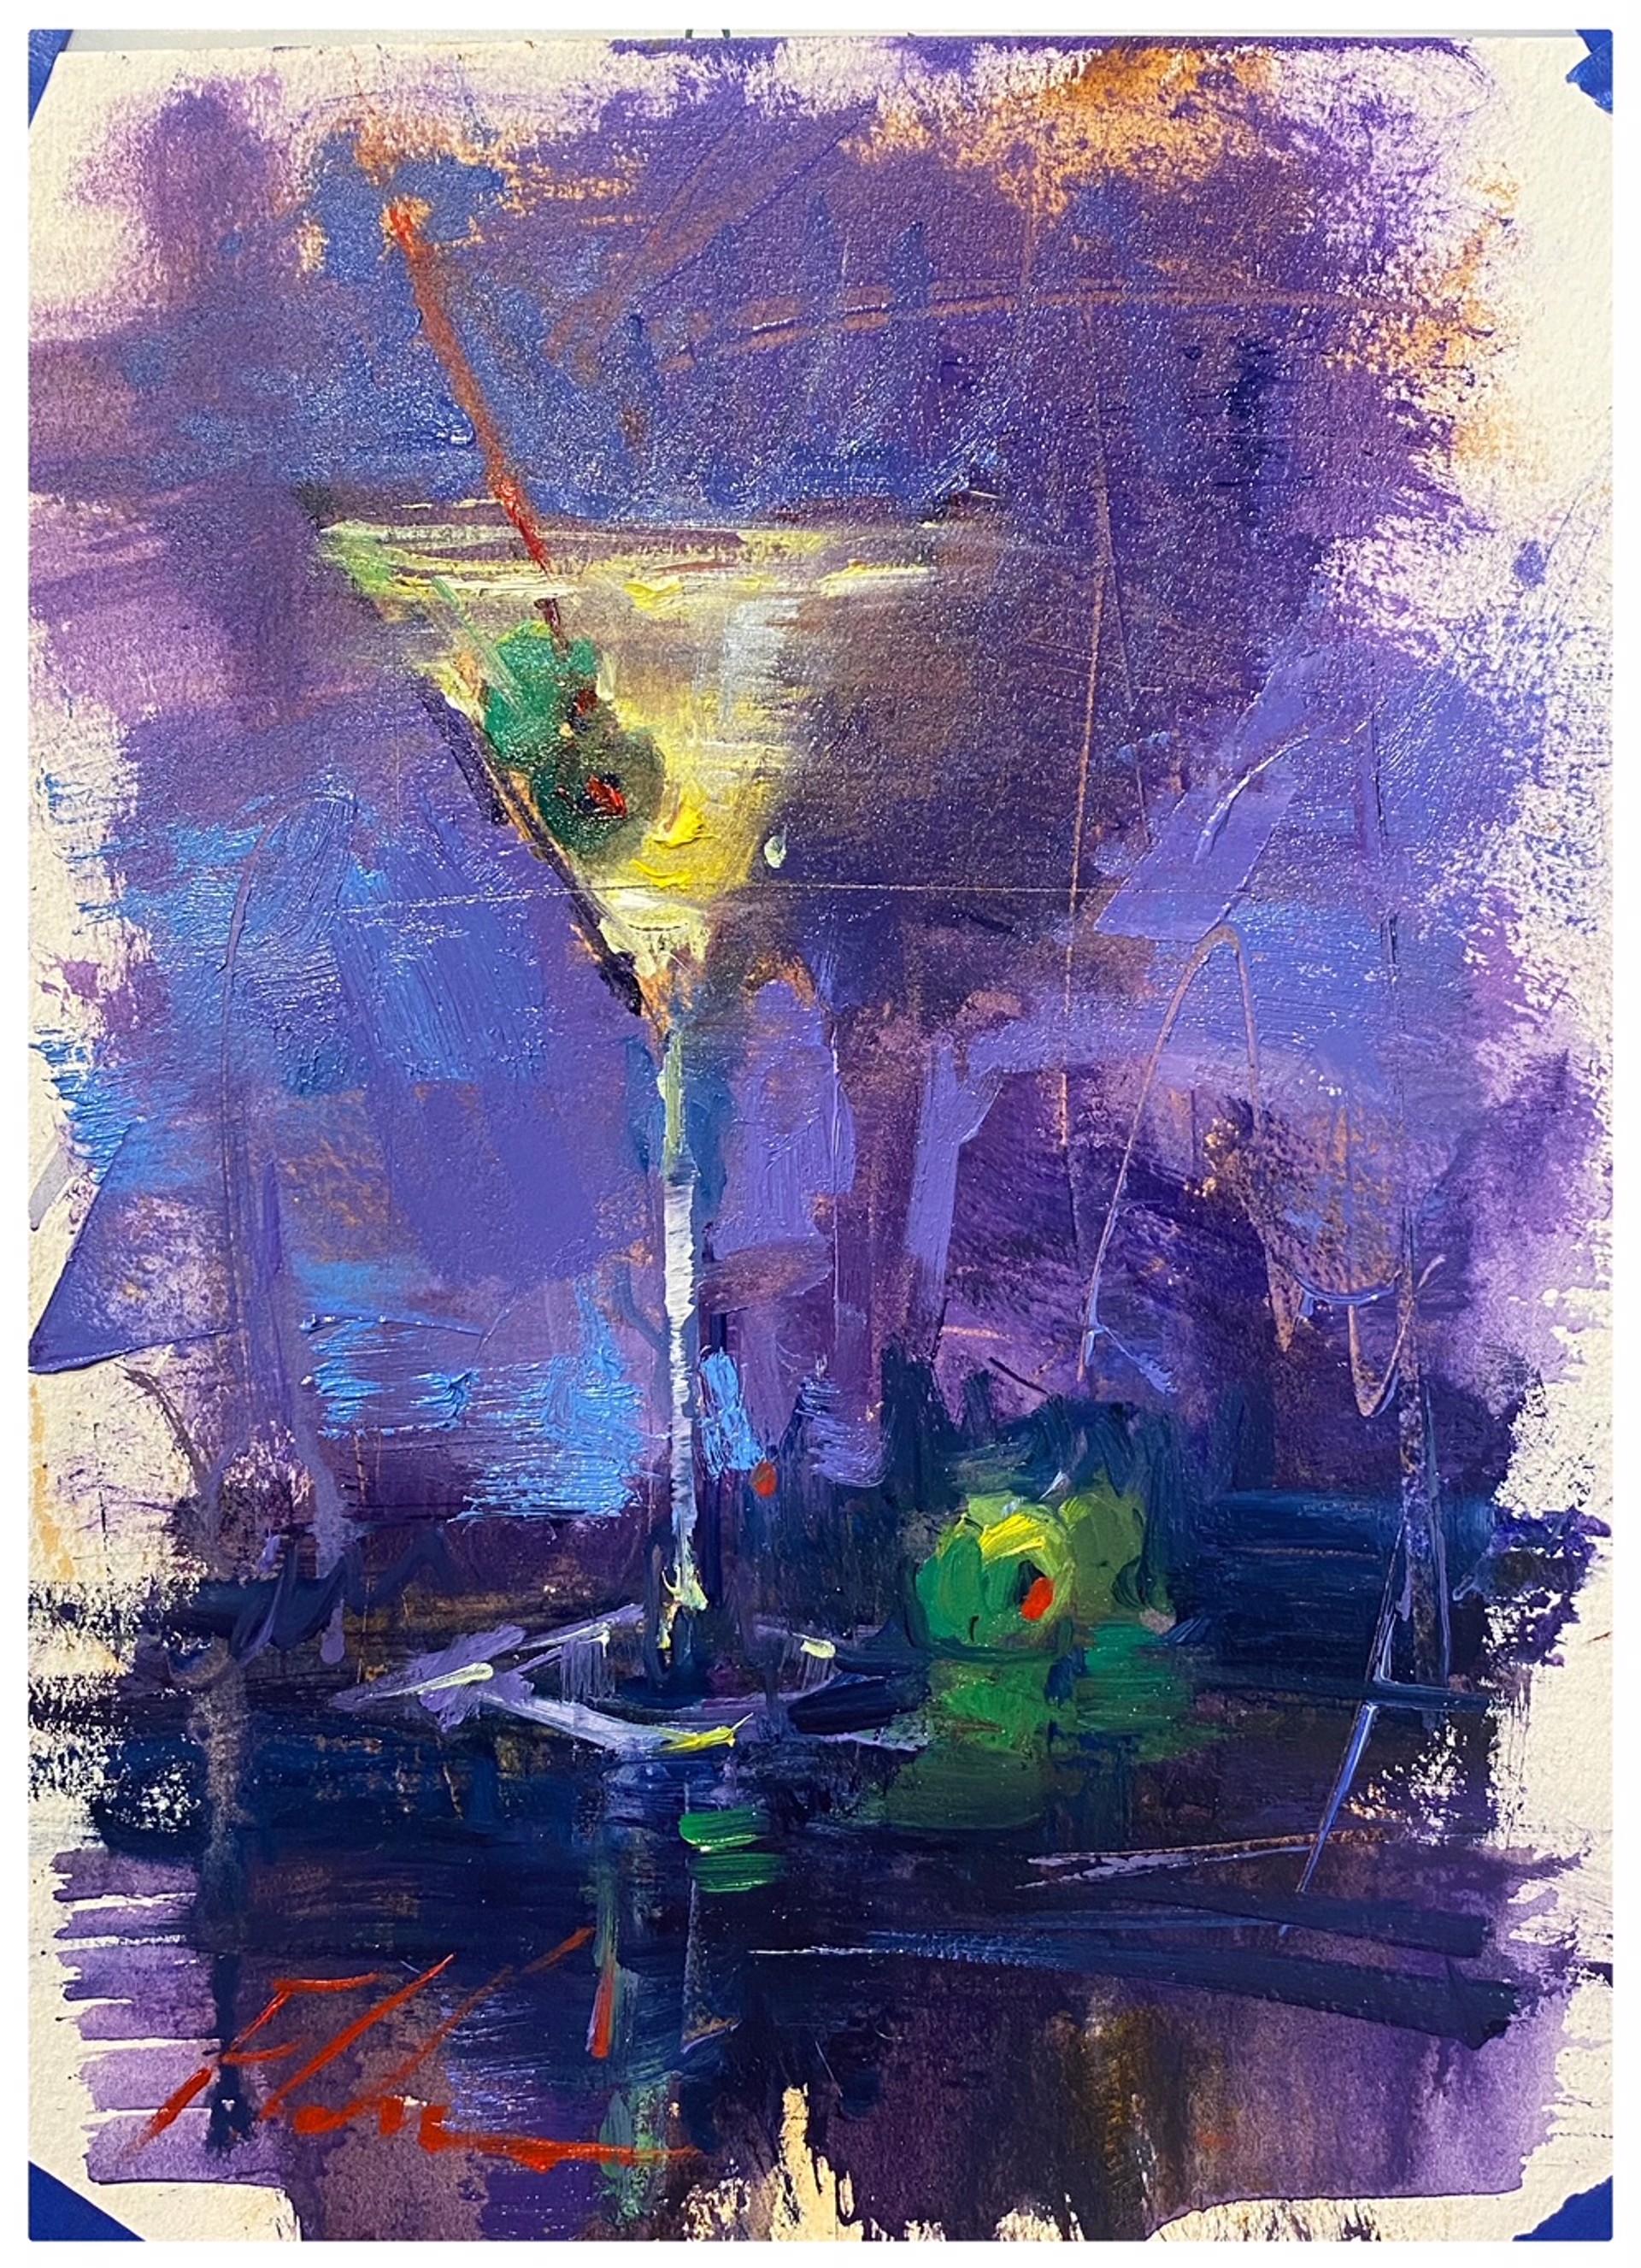 Made at show III (Martini) by Michael Flohr